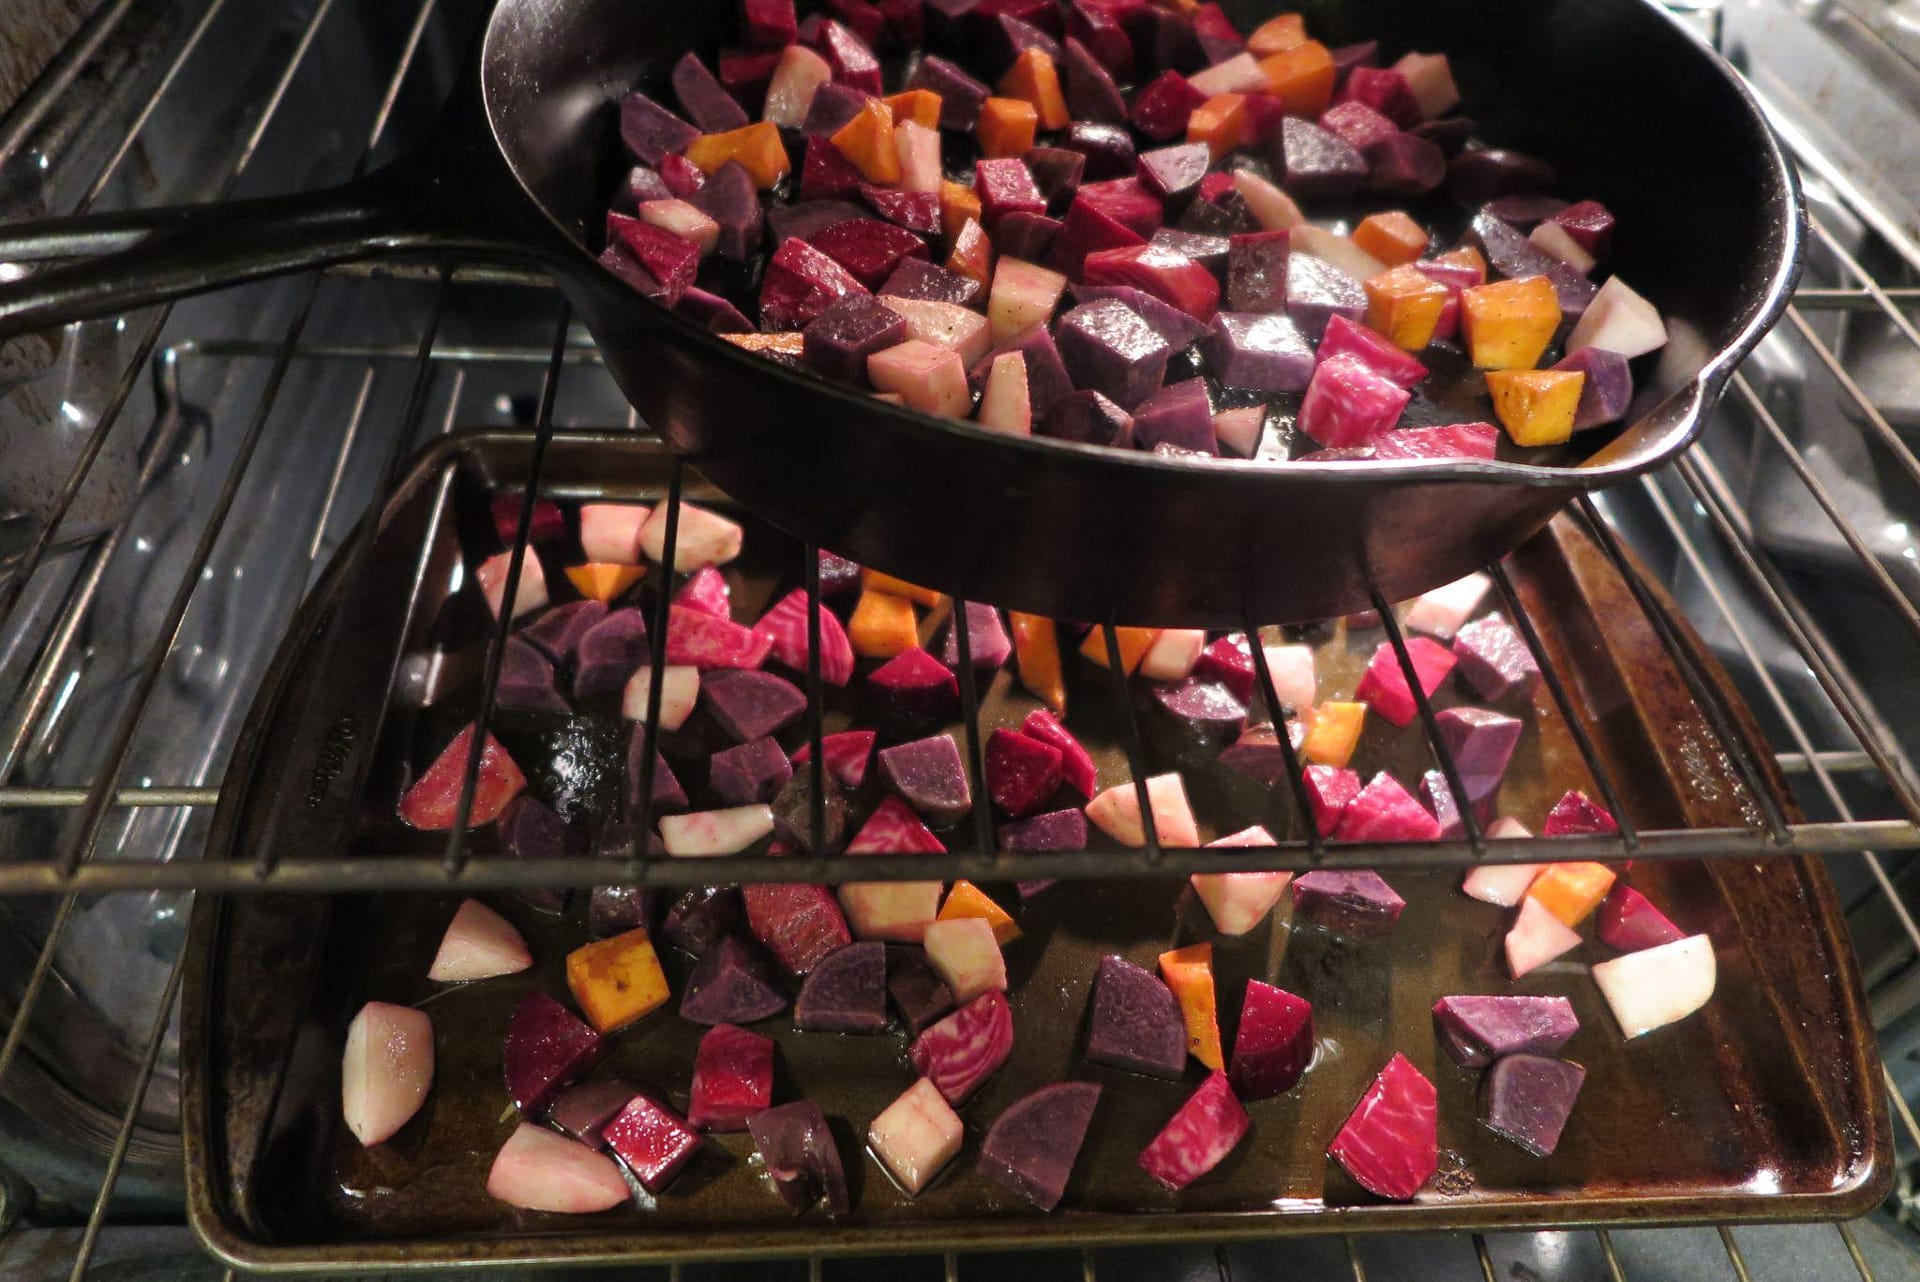 Chiogga beets, sweet potatoes, turnips, and red potatoes in a cast iron skillet and on a cookie sheet in the oven ready to be roasted